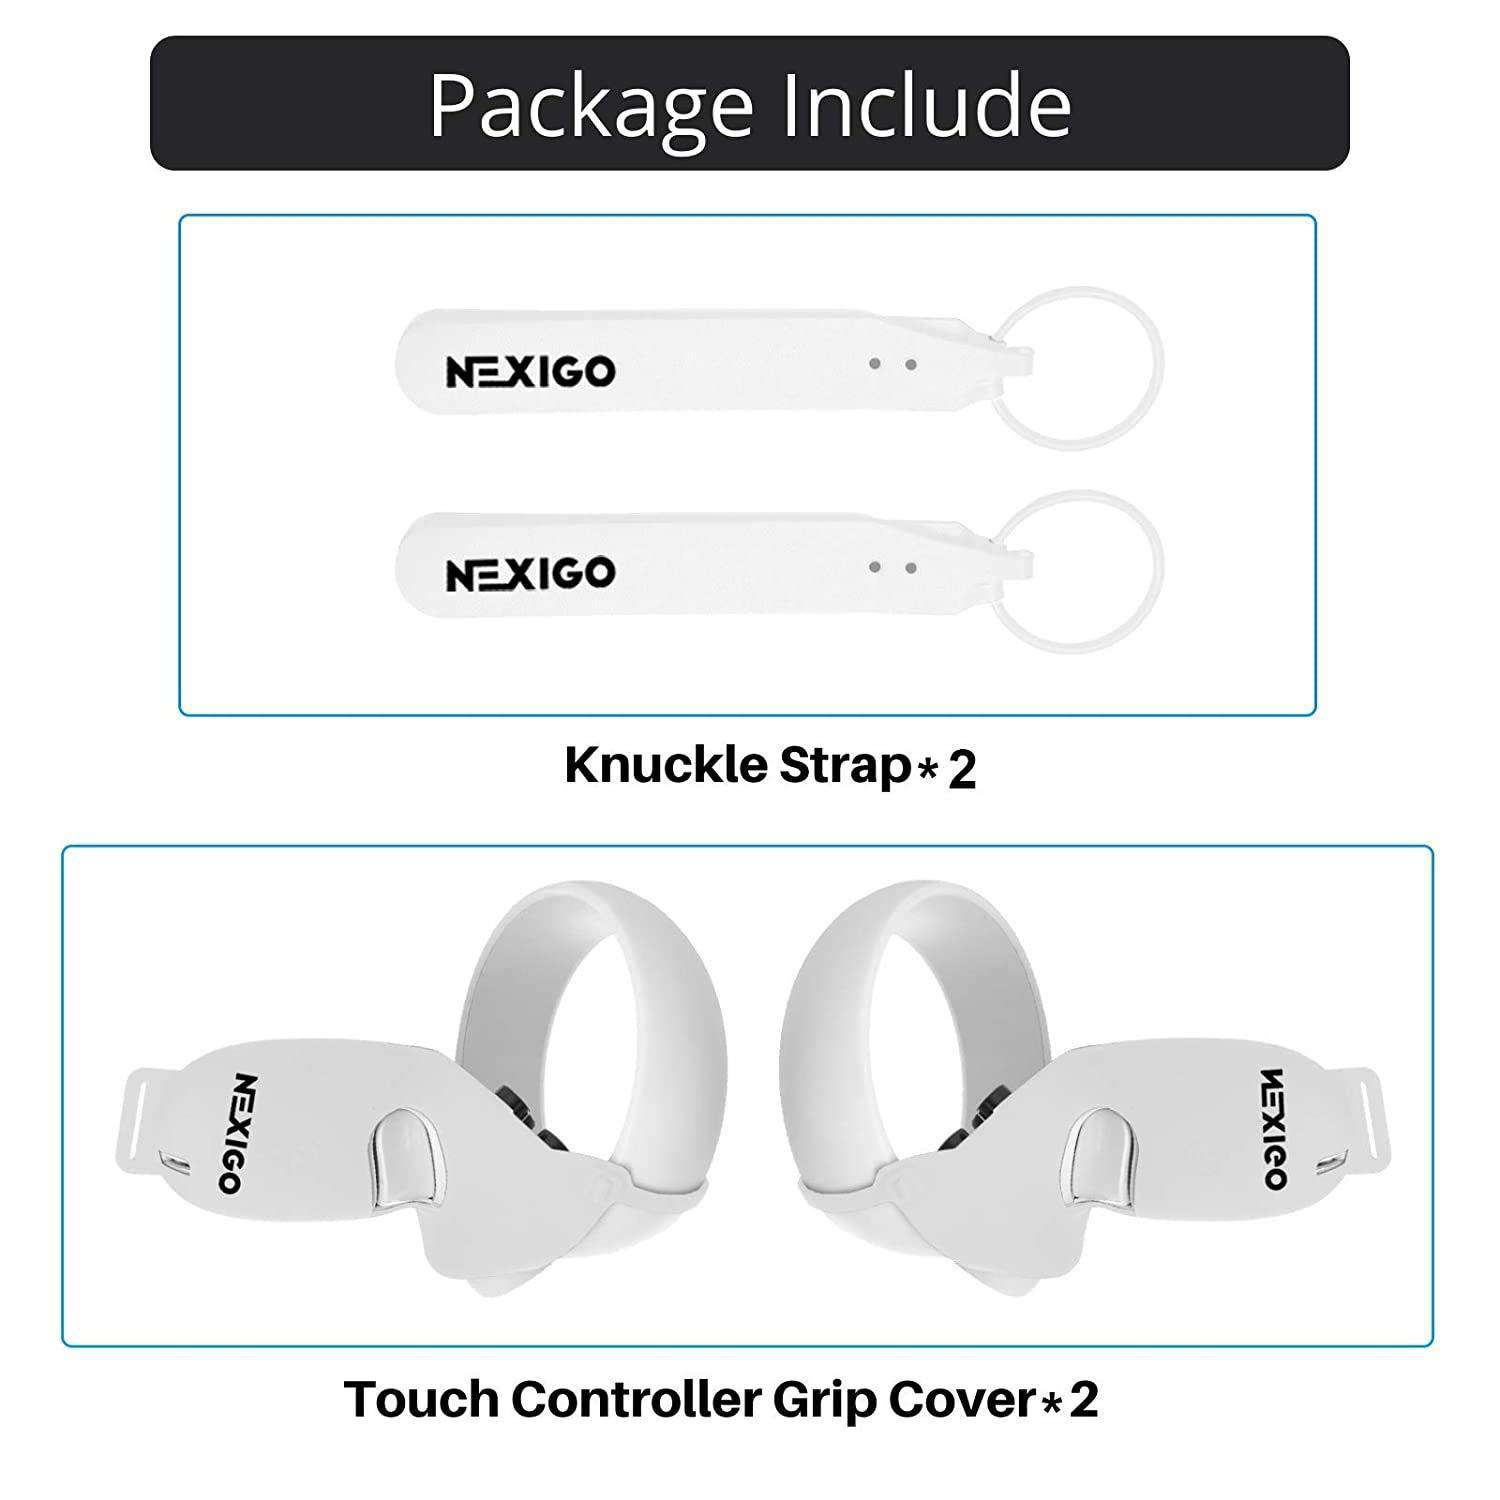 The package includes 2 Knuckle Strap and 2 Touch Controller Grip Covers.